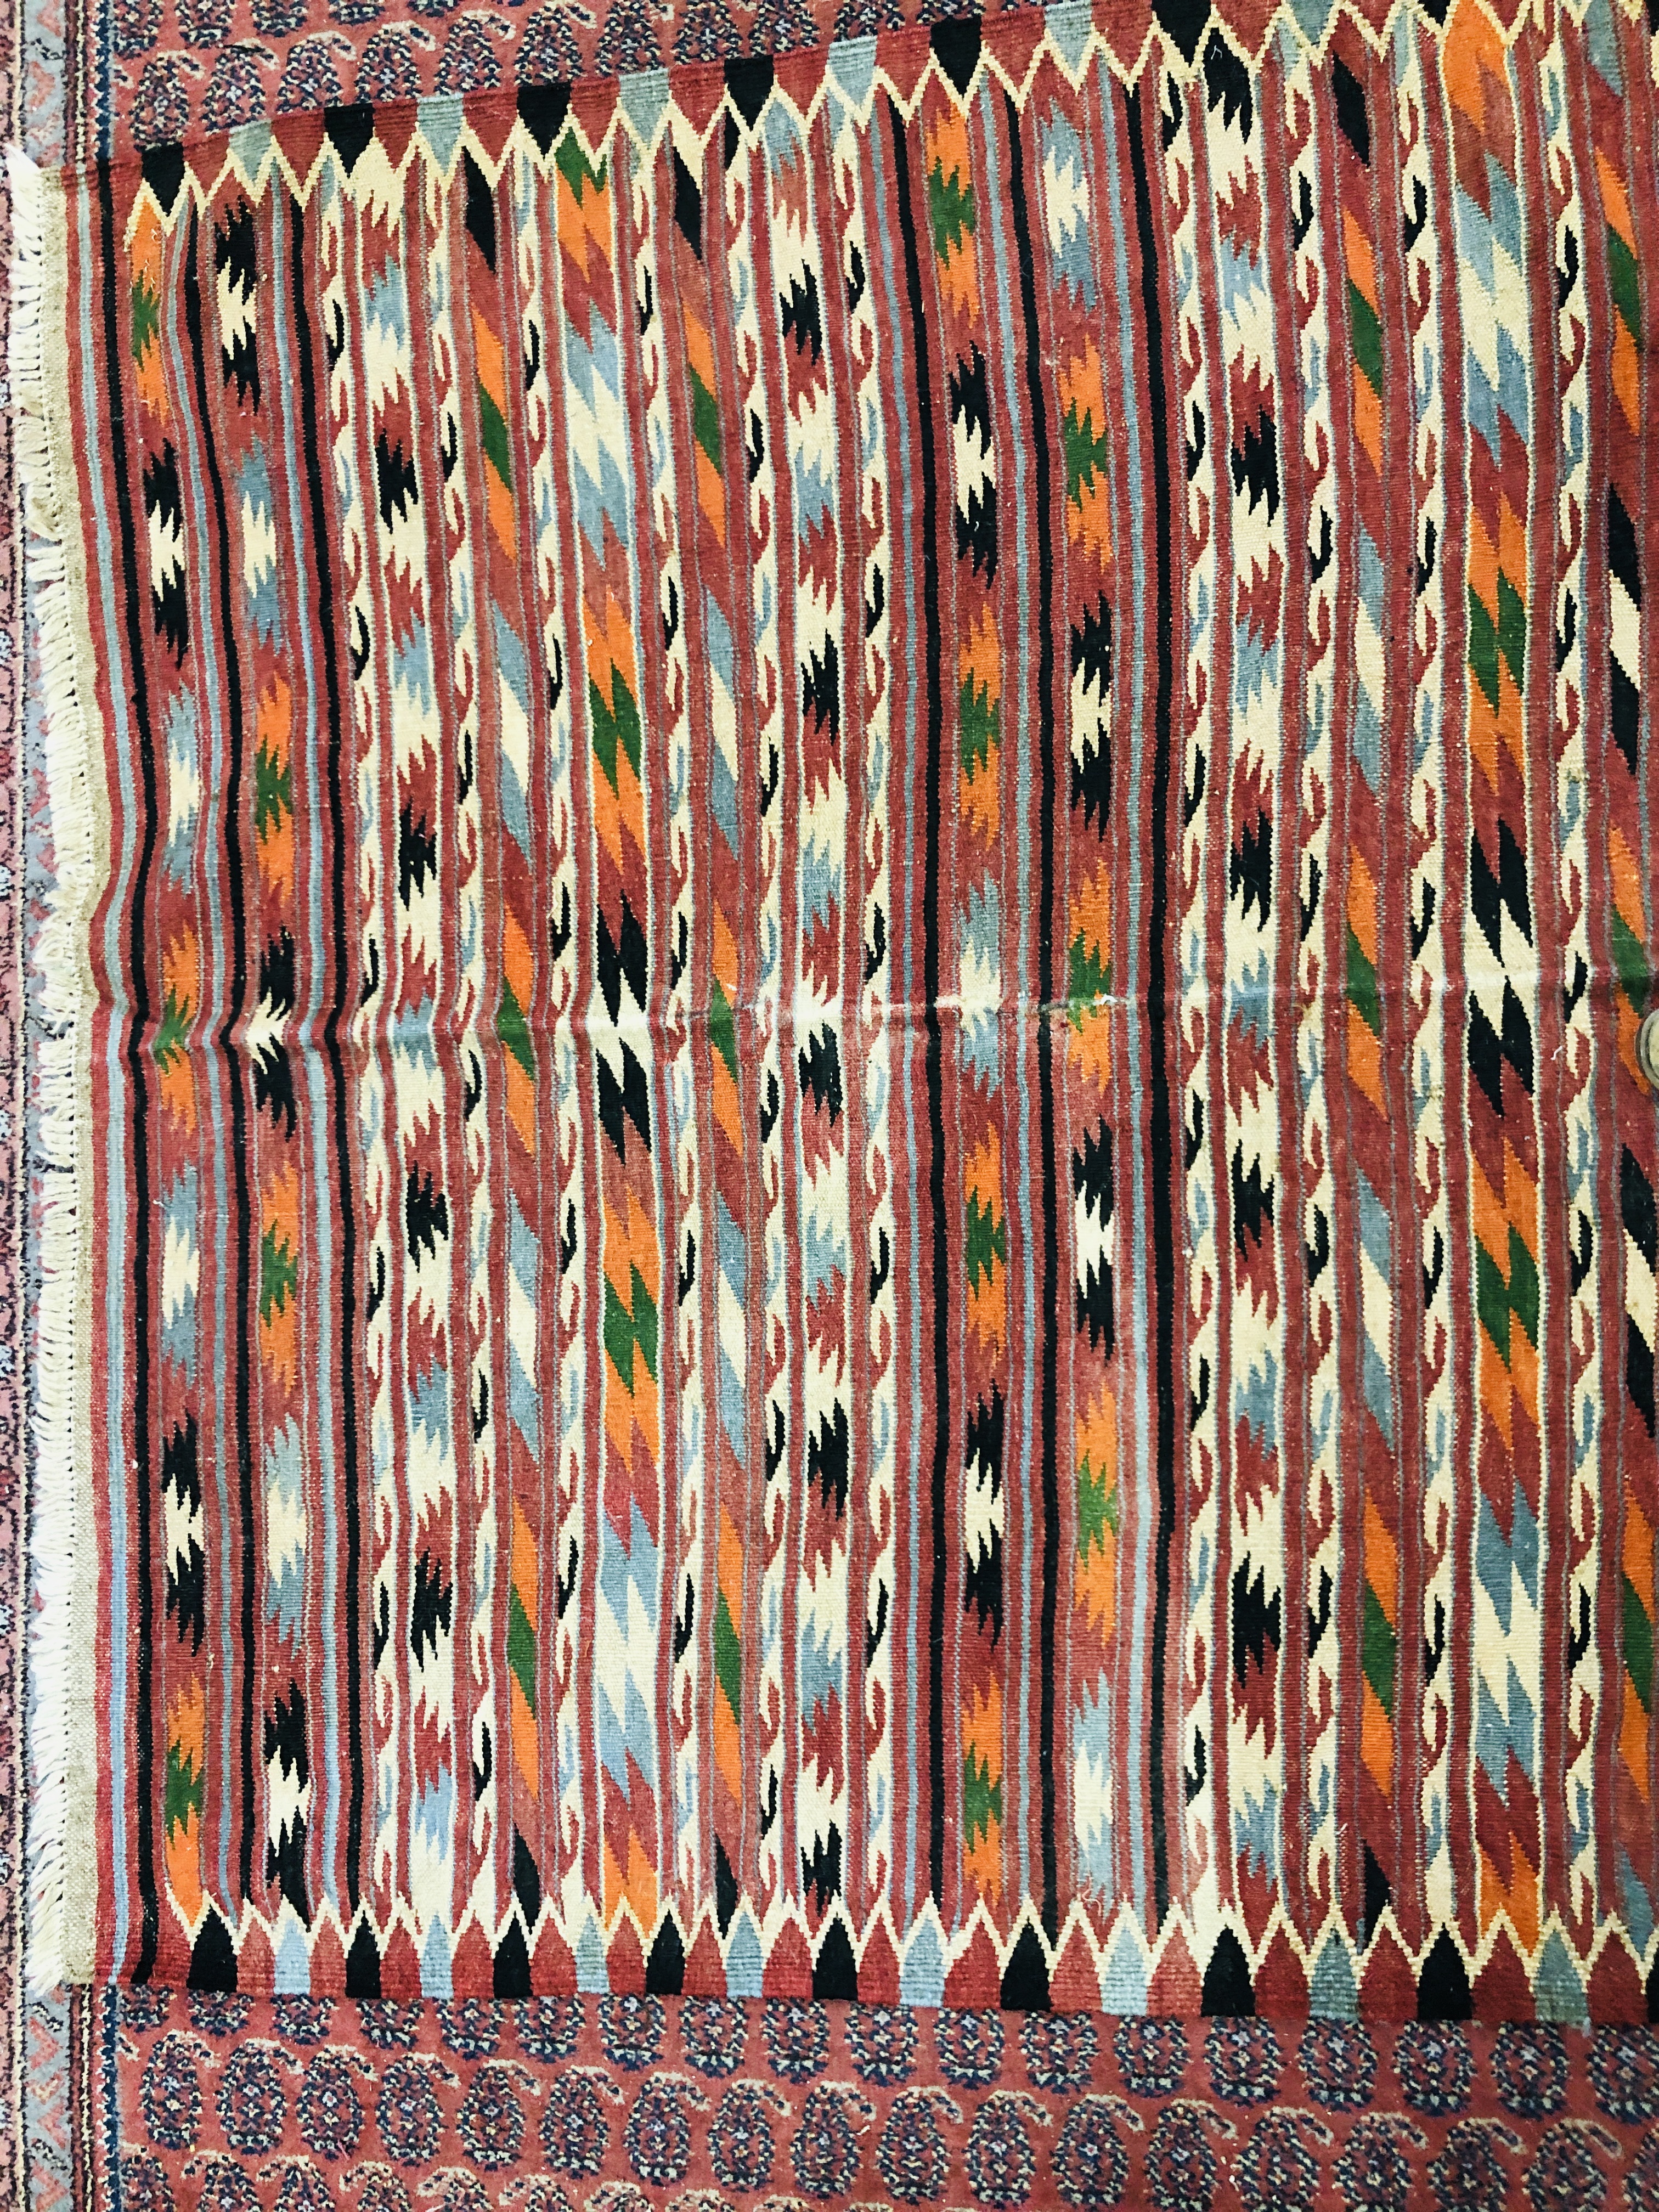 TWO PERSAIN STYLE FLAT WEAVE RUGS 280CM. X 138CM. , 169CM. X 138CM. - Image 9 of 12